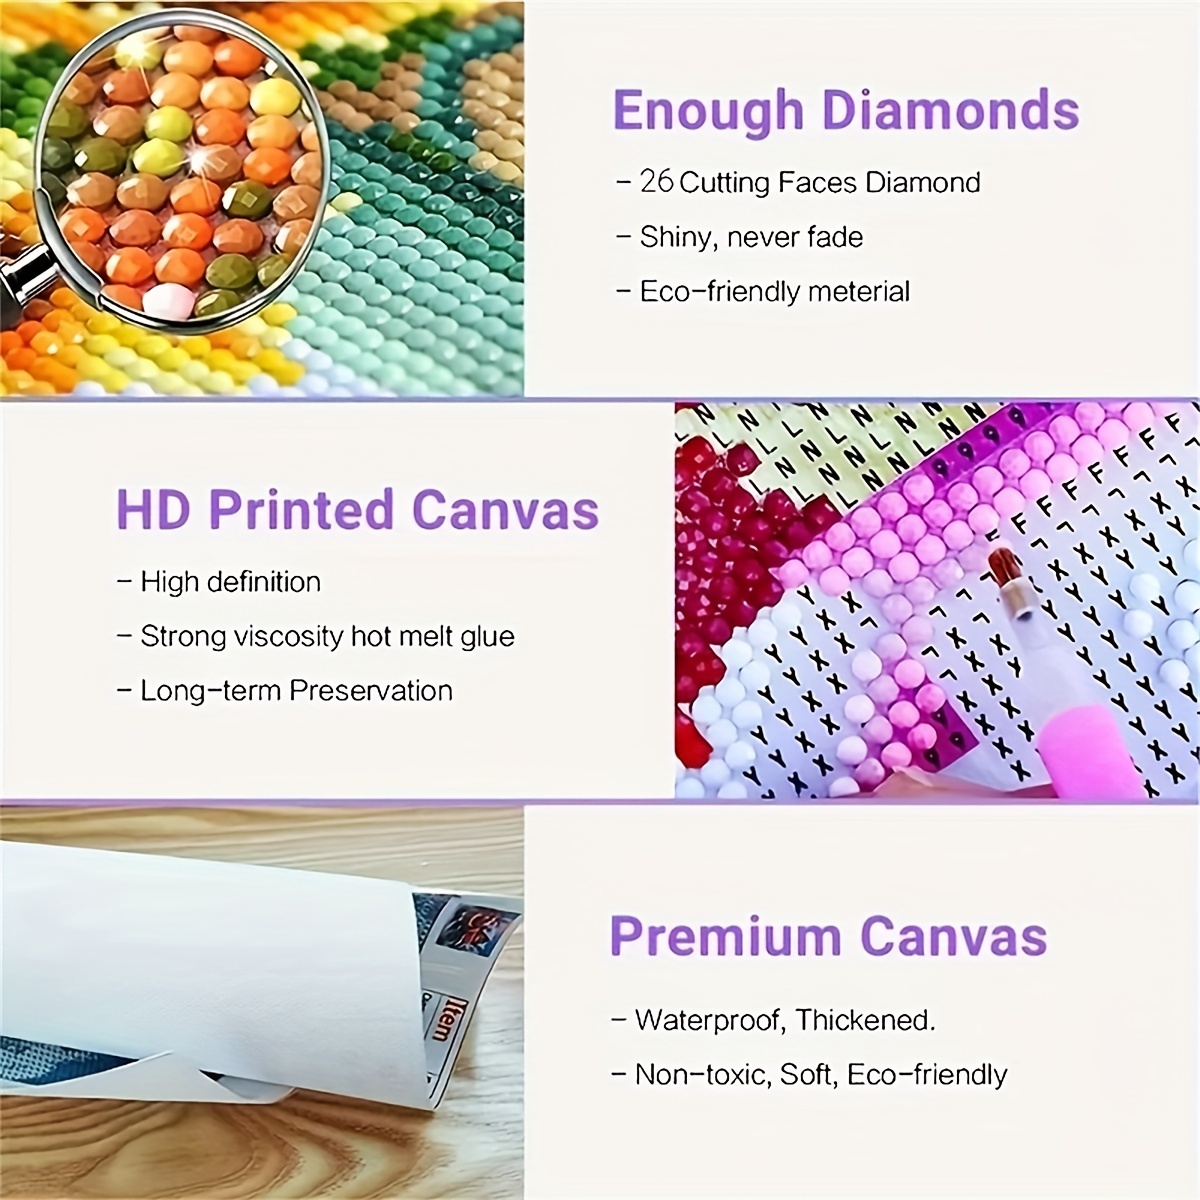 What is in a Diamond Art Kit? - Smiling Colors